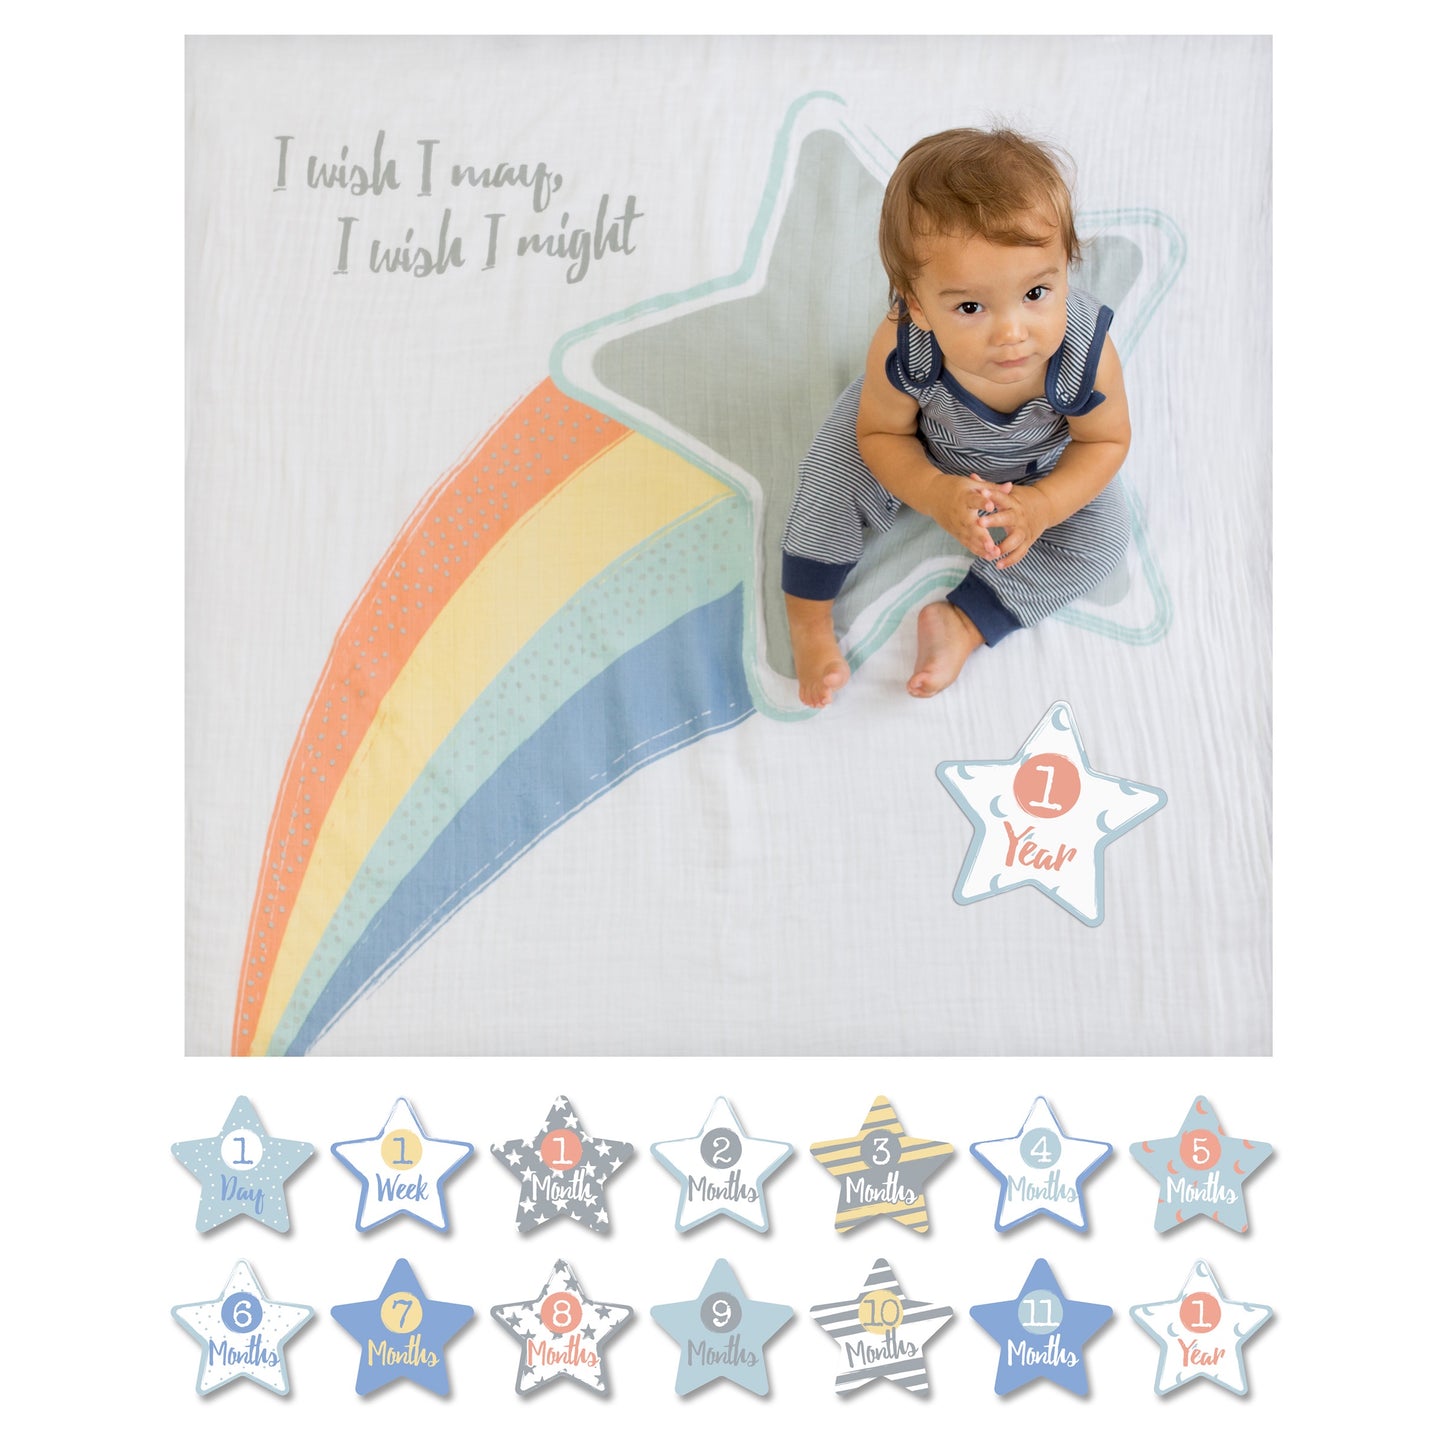 I Wish I May Baby’s First Year Blanket and Cards Set I Wish I May - Doodlebug's Children's Boutique